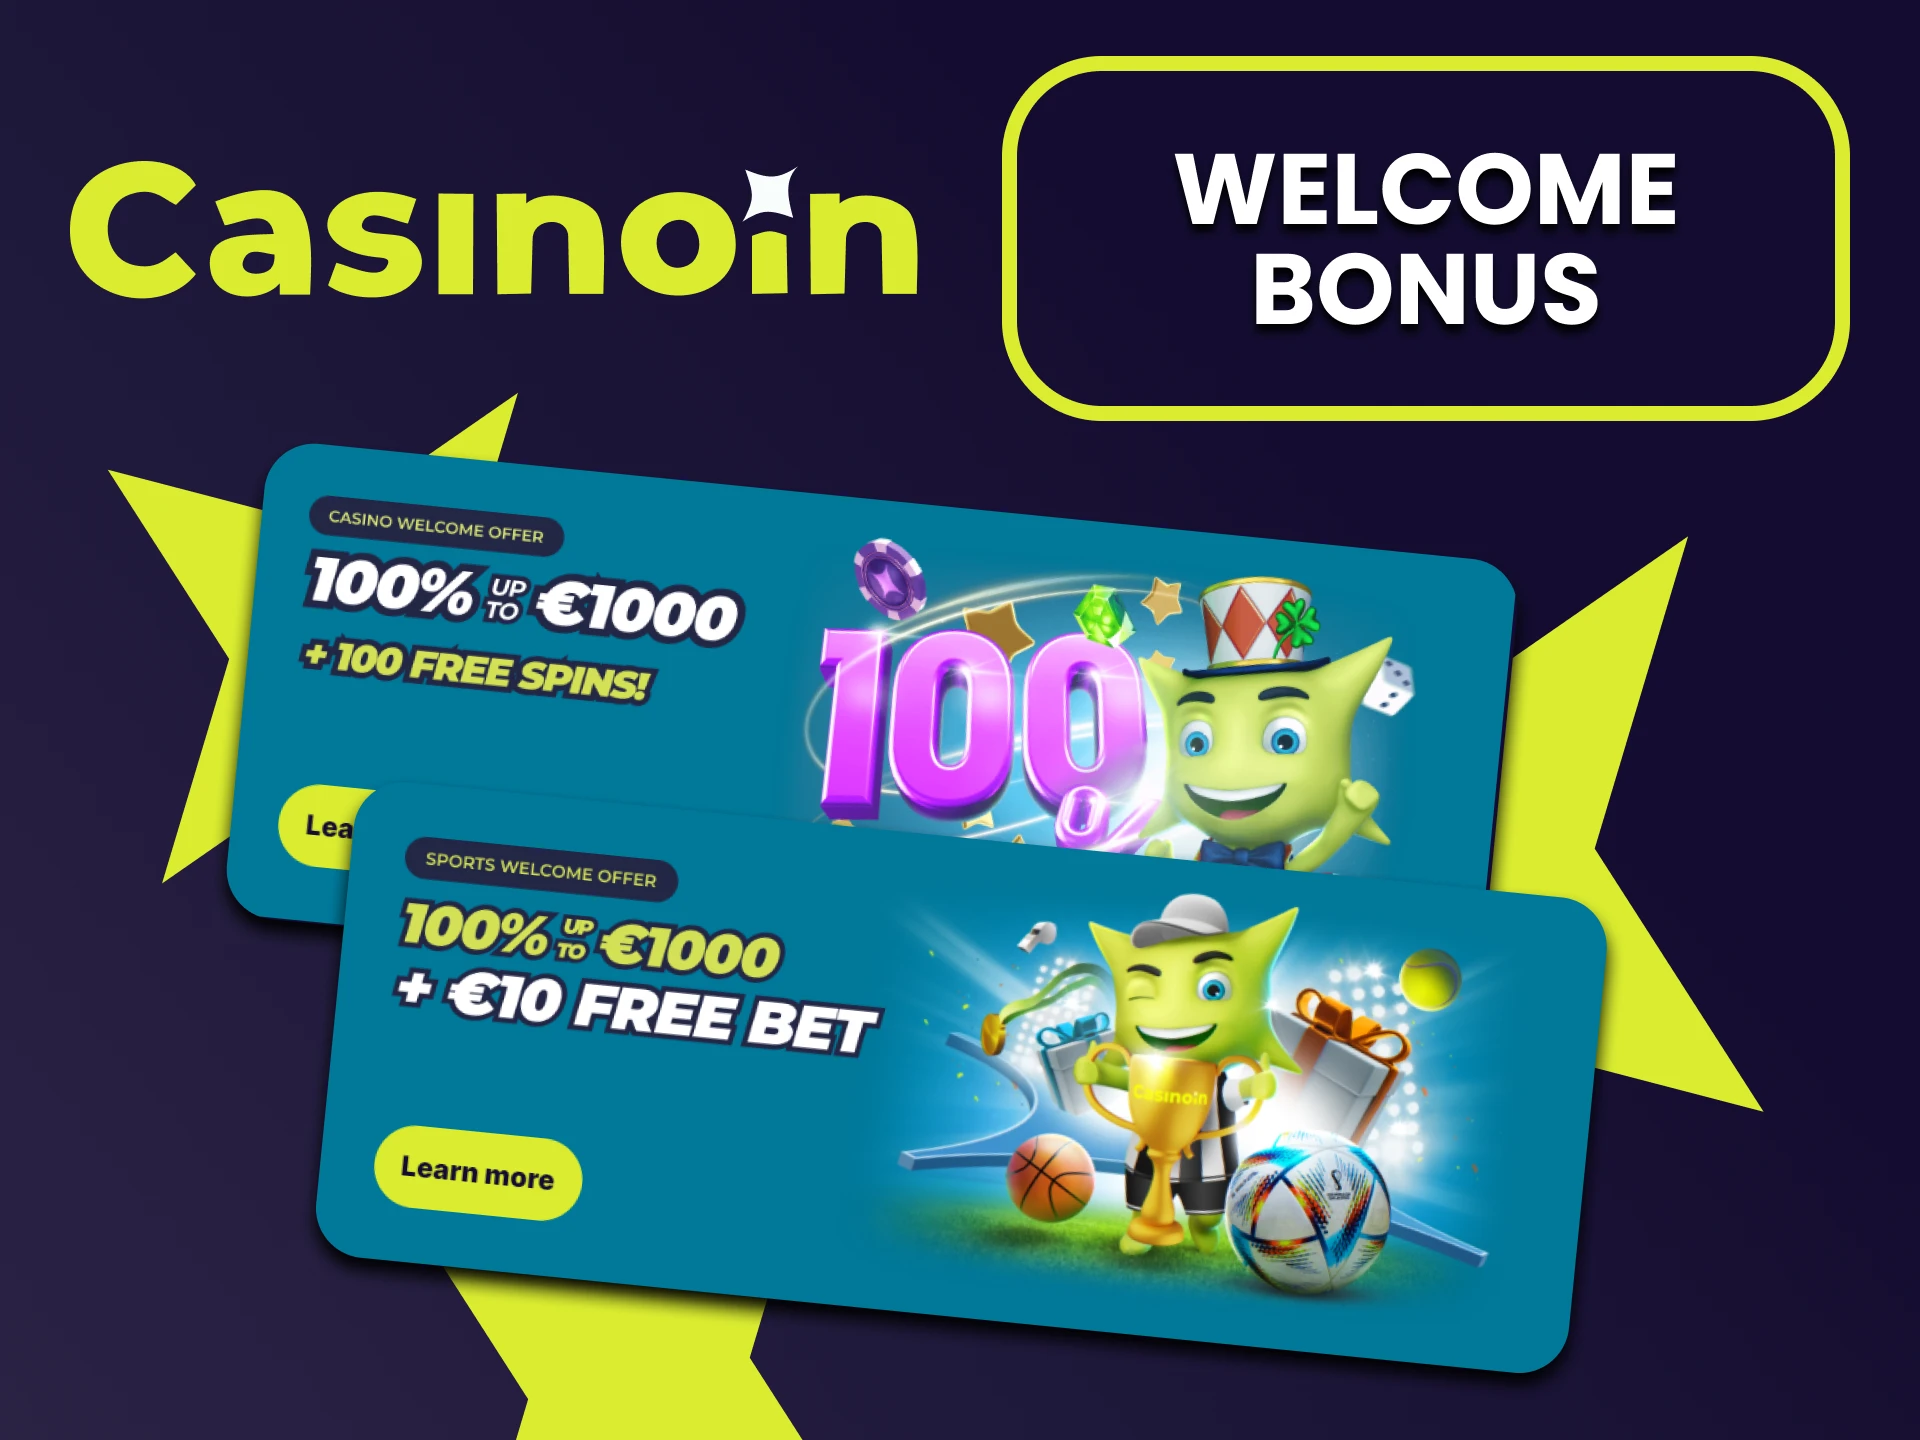 Casinoin gives a welcome bonus to its users.